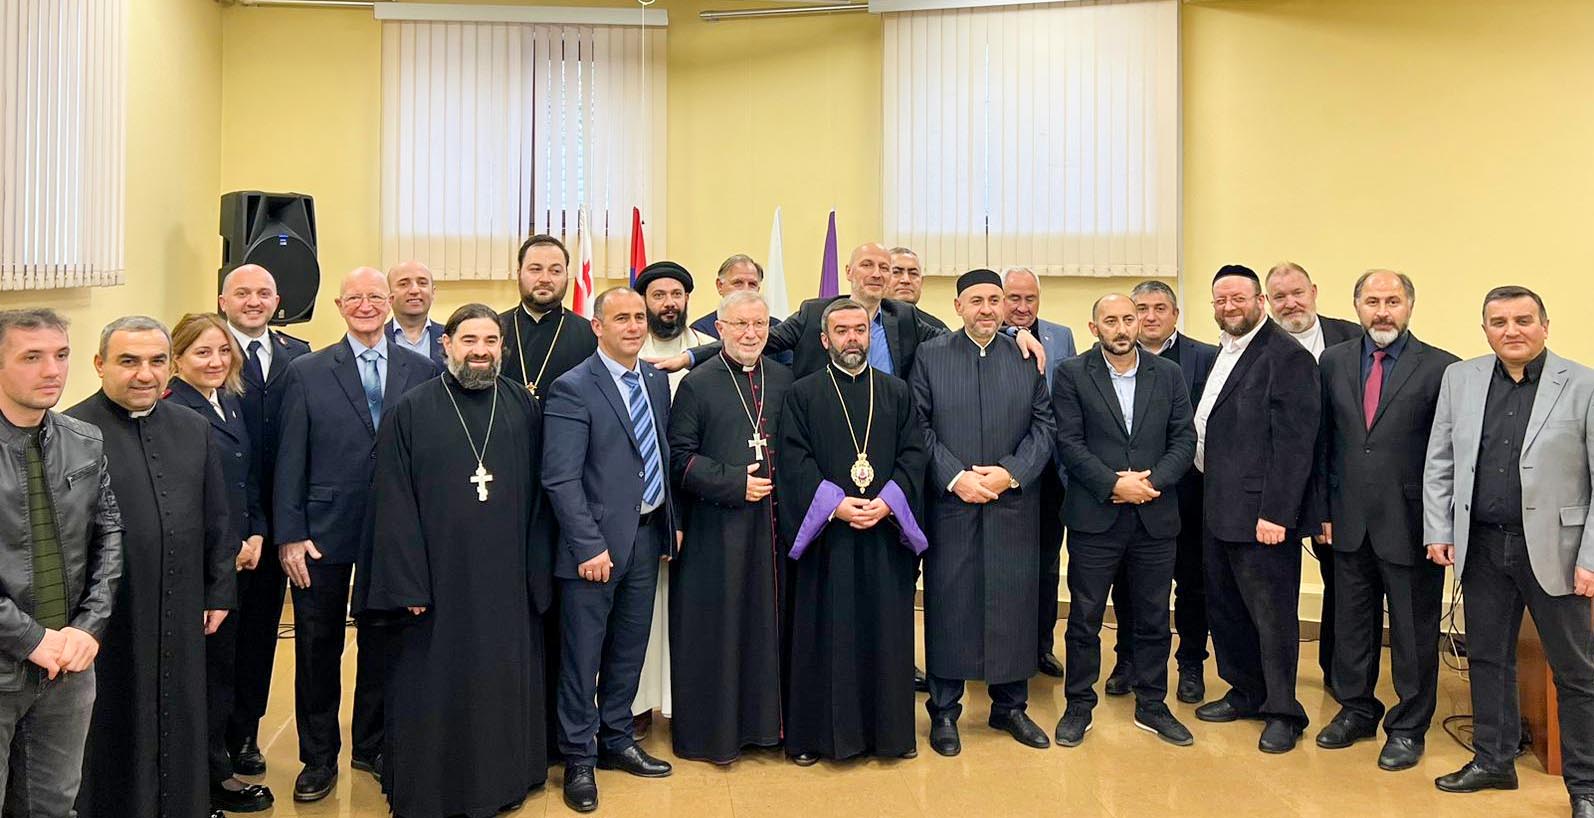 Reception dedicated to the International Day for Tolerance at the Armenian Diocese in Georgia